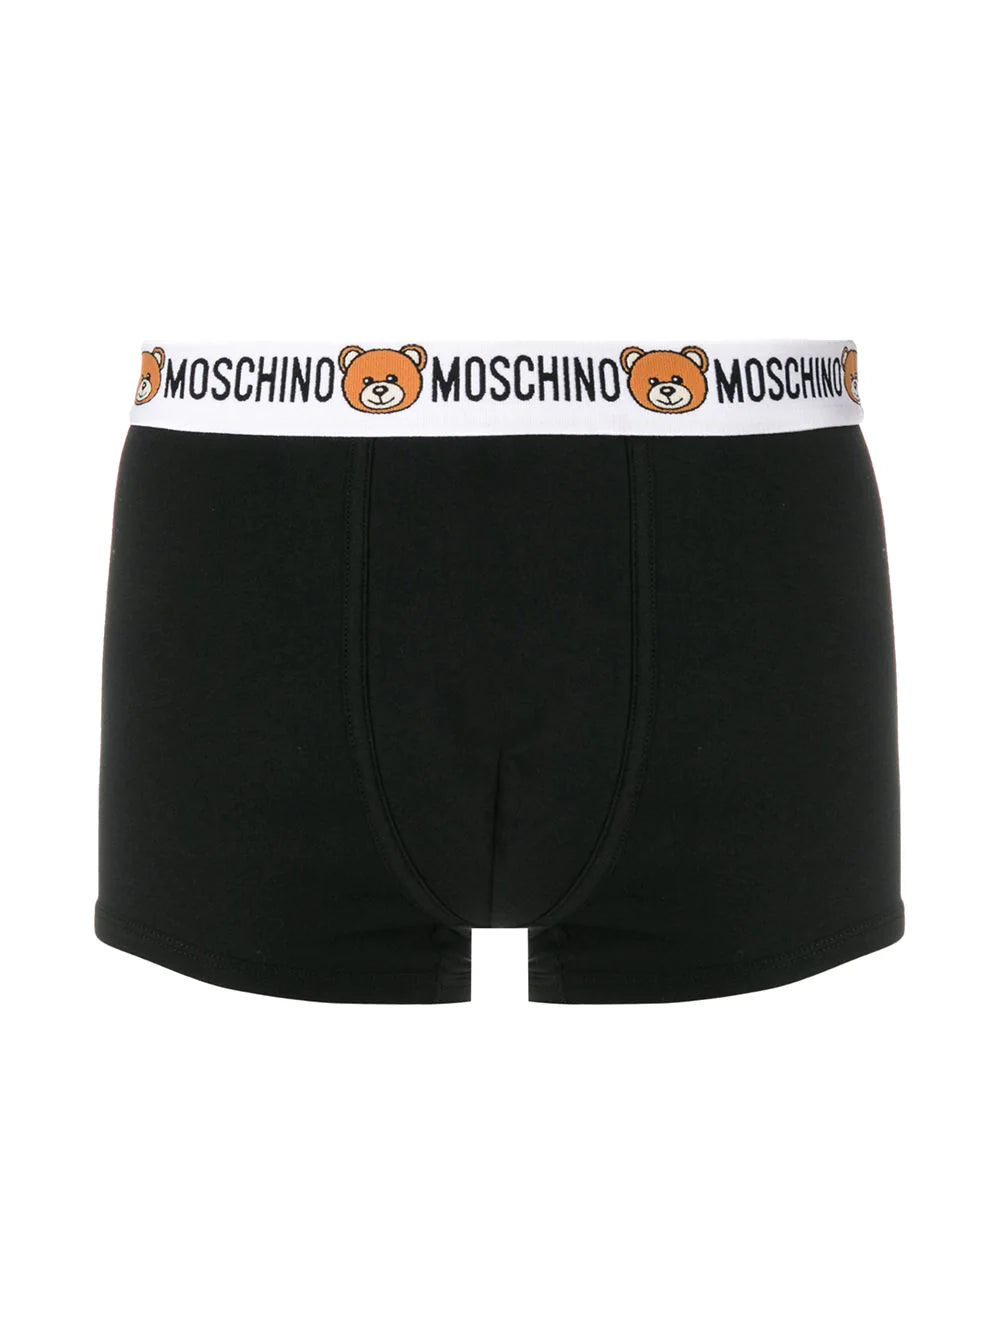 Moschino 2 Pack Teddy Logo Boxers